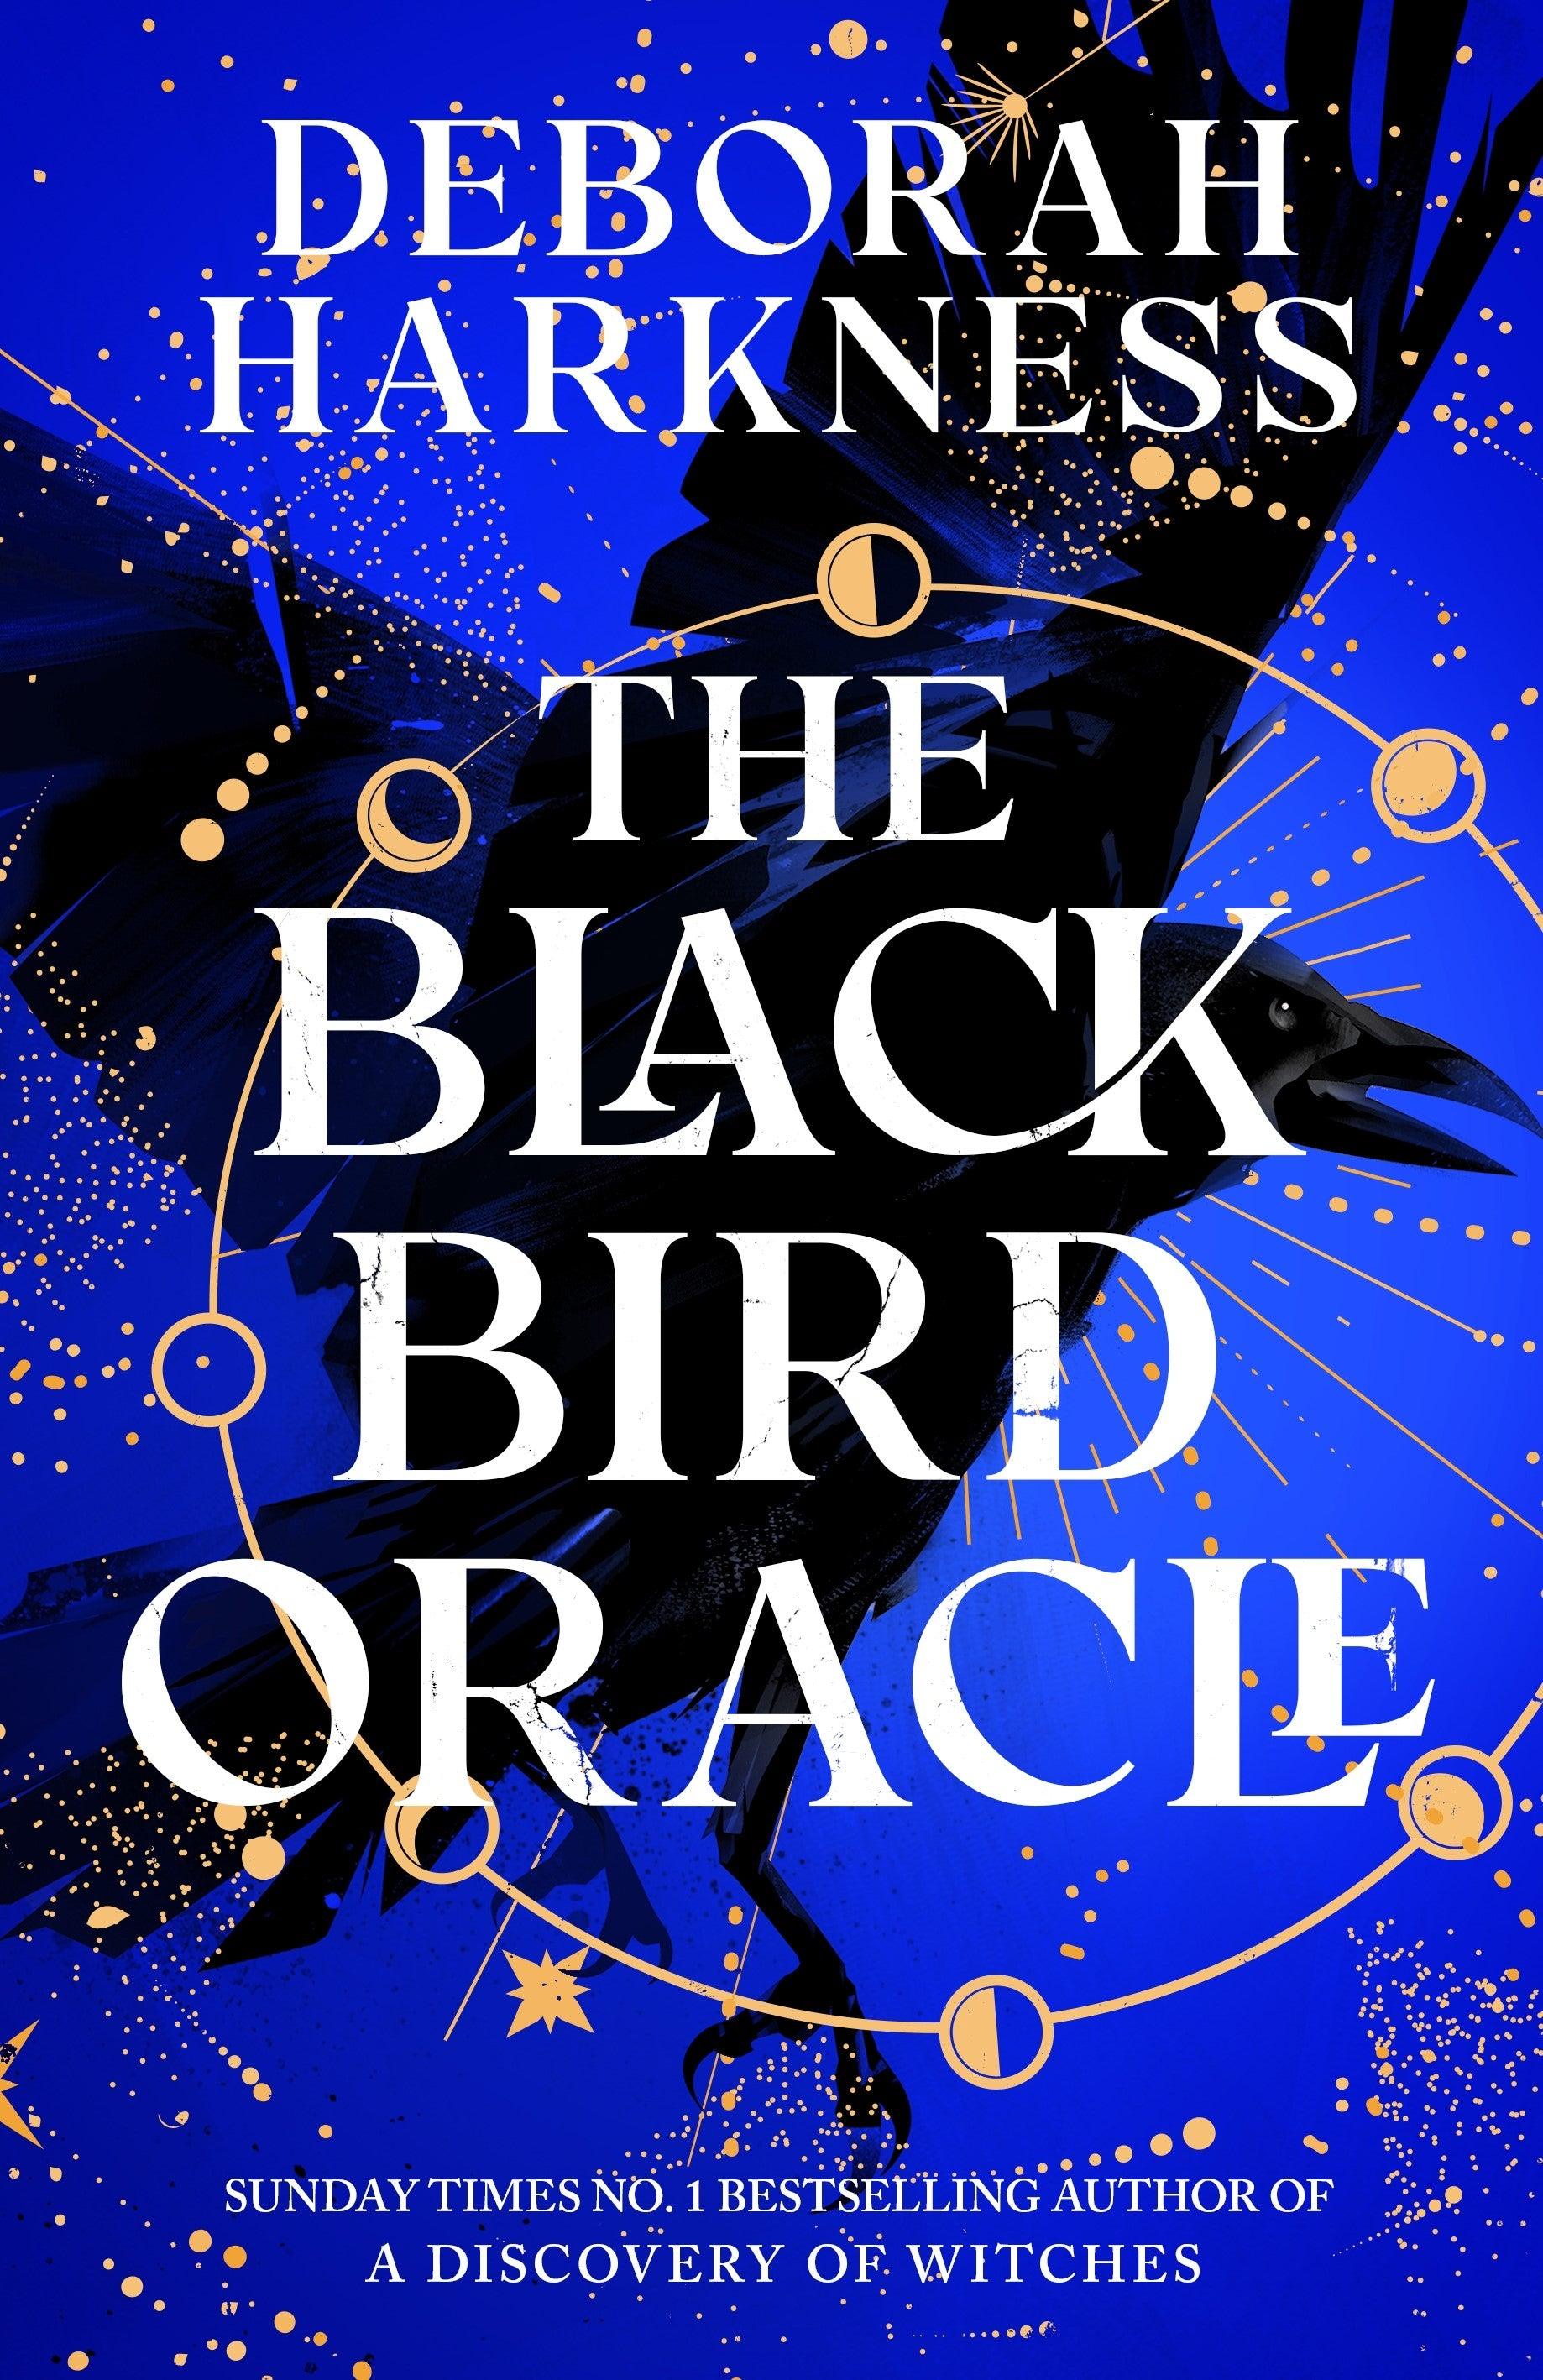 'The Black Bird Oracle' by Deborah Harkness - Signed Foiled Slipcase Indie Exclusive - Pub. July 16th - The Cleeve Bookshop